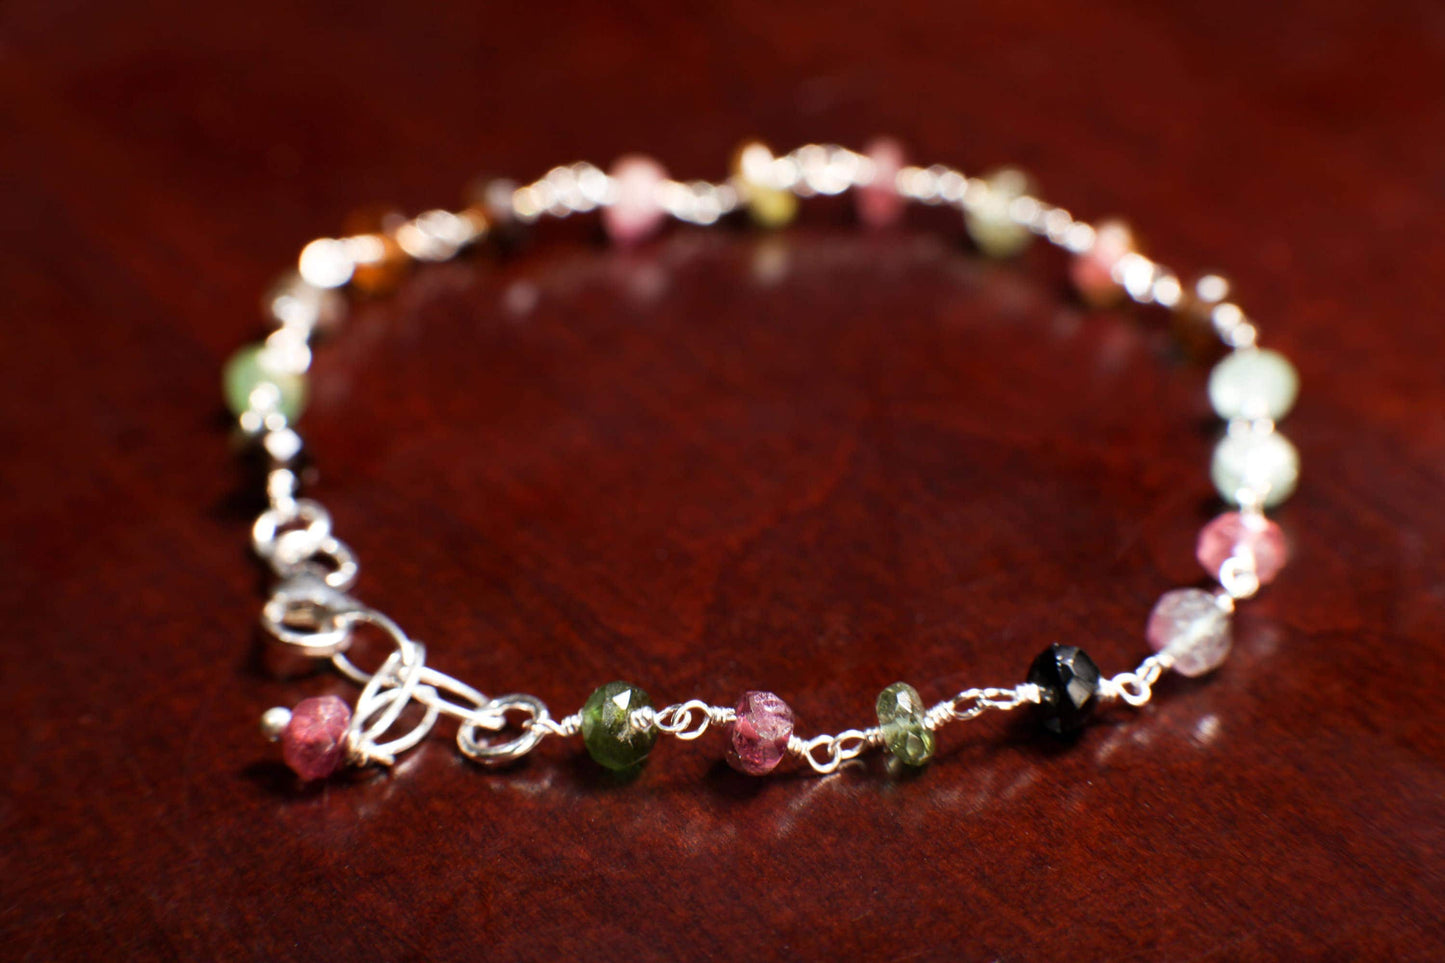 Watermelon Tourmaline Wire Wrapped Faceted large 5mm Rondelle Bracelet in 925 Sterling Silver Clasp, Gift for her